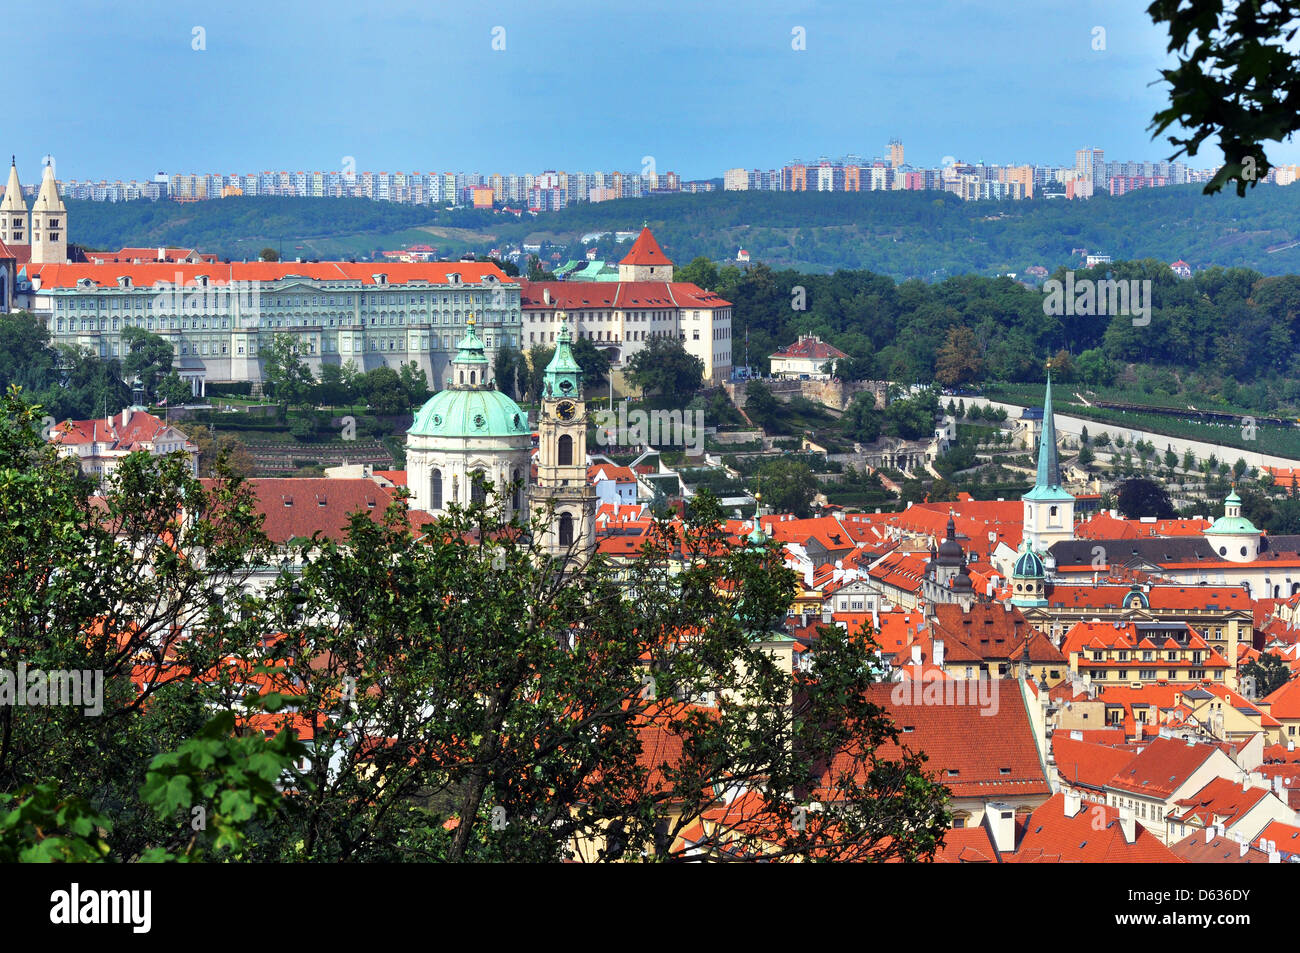 High view of Prague, showing the Castle and city centre. Stock Photo